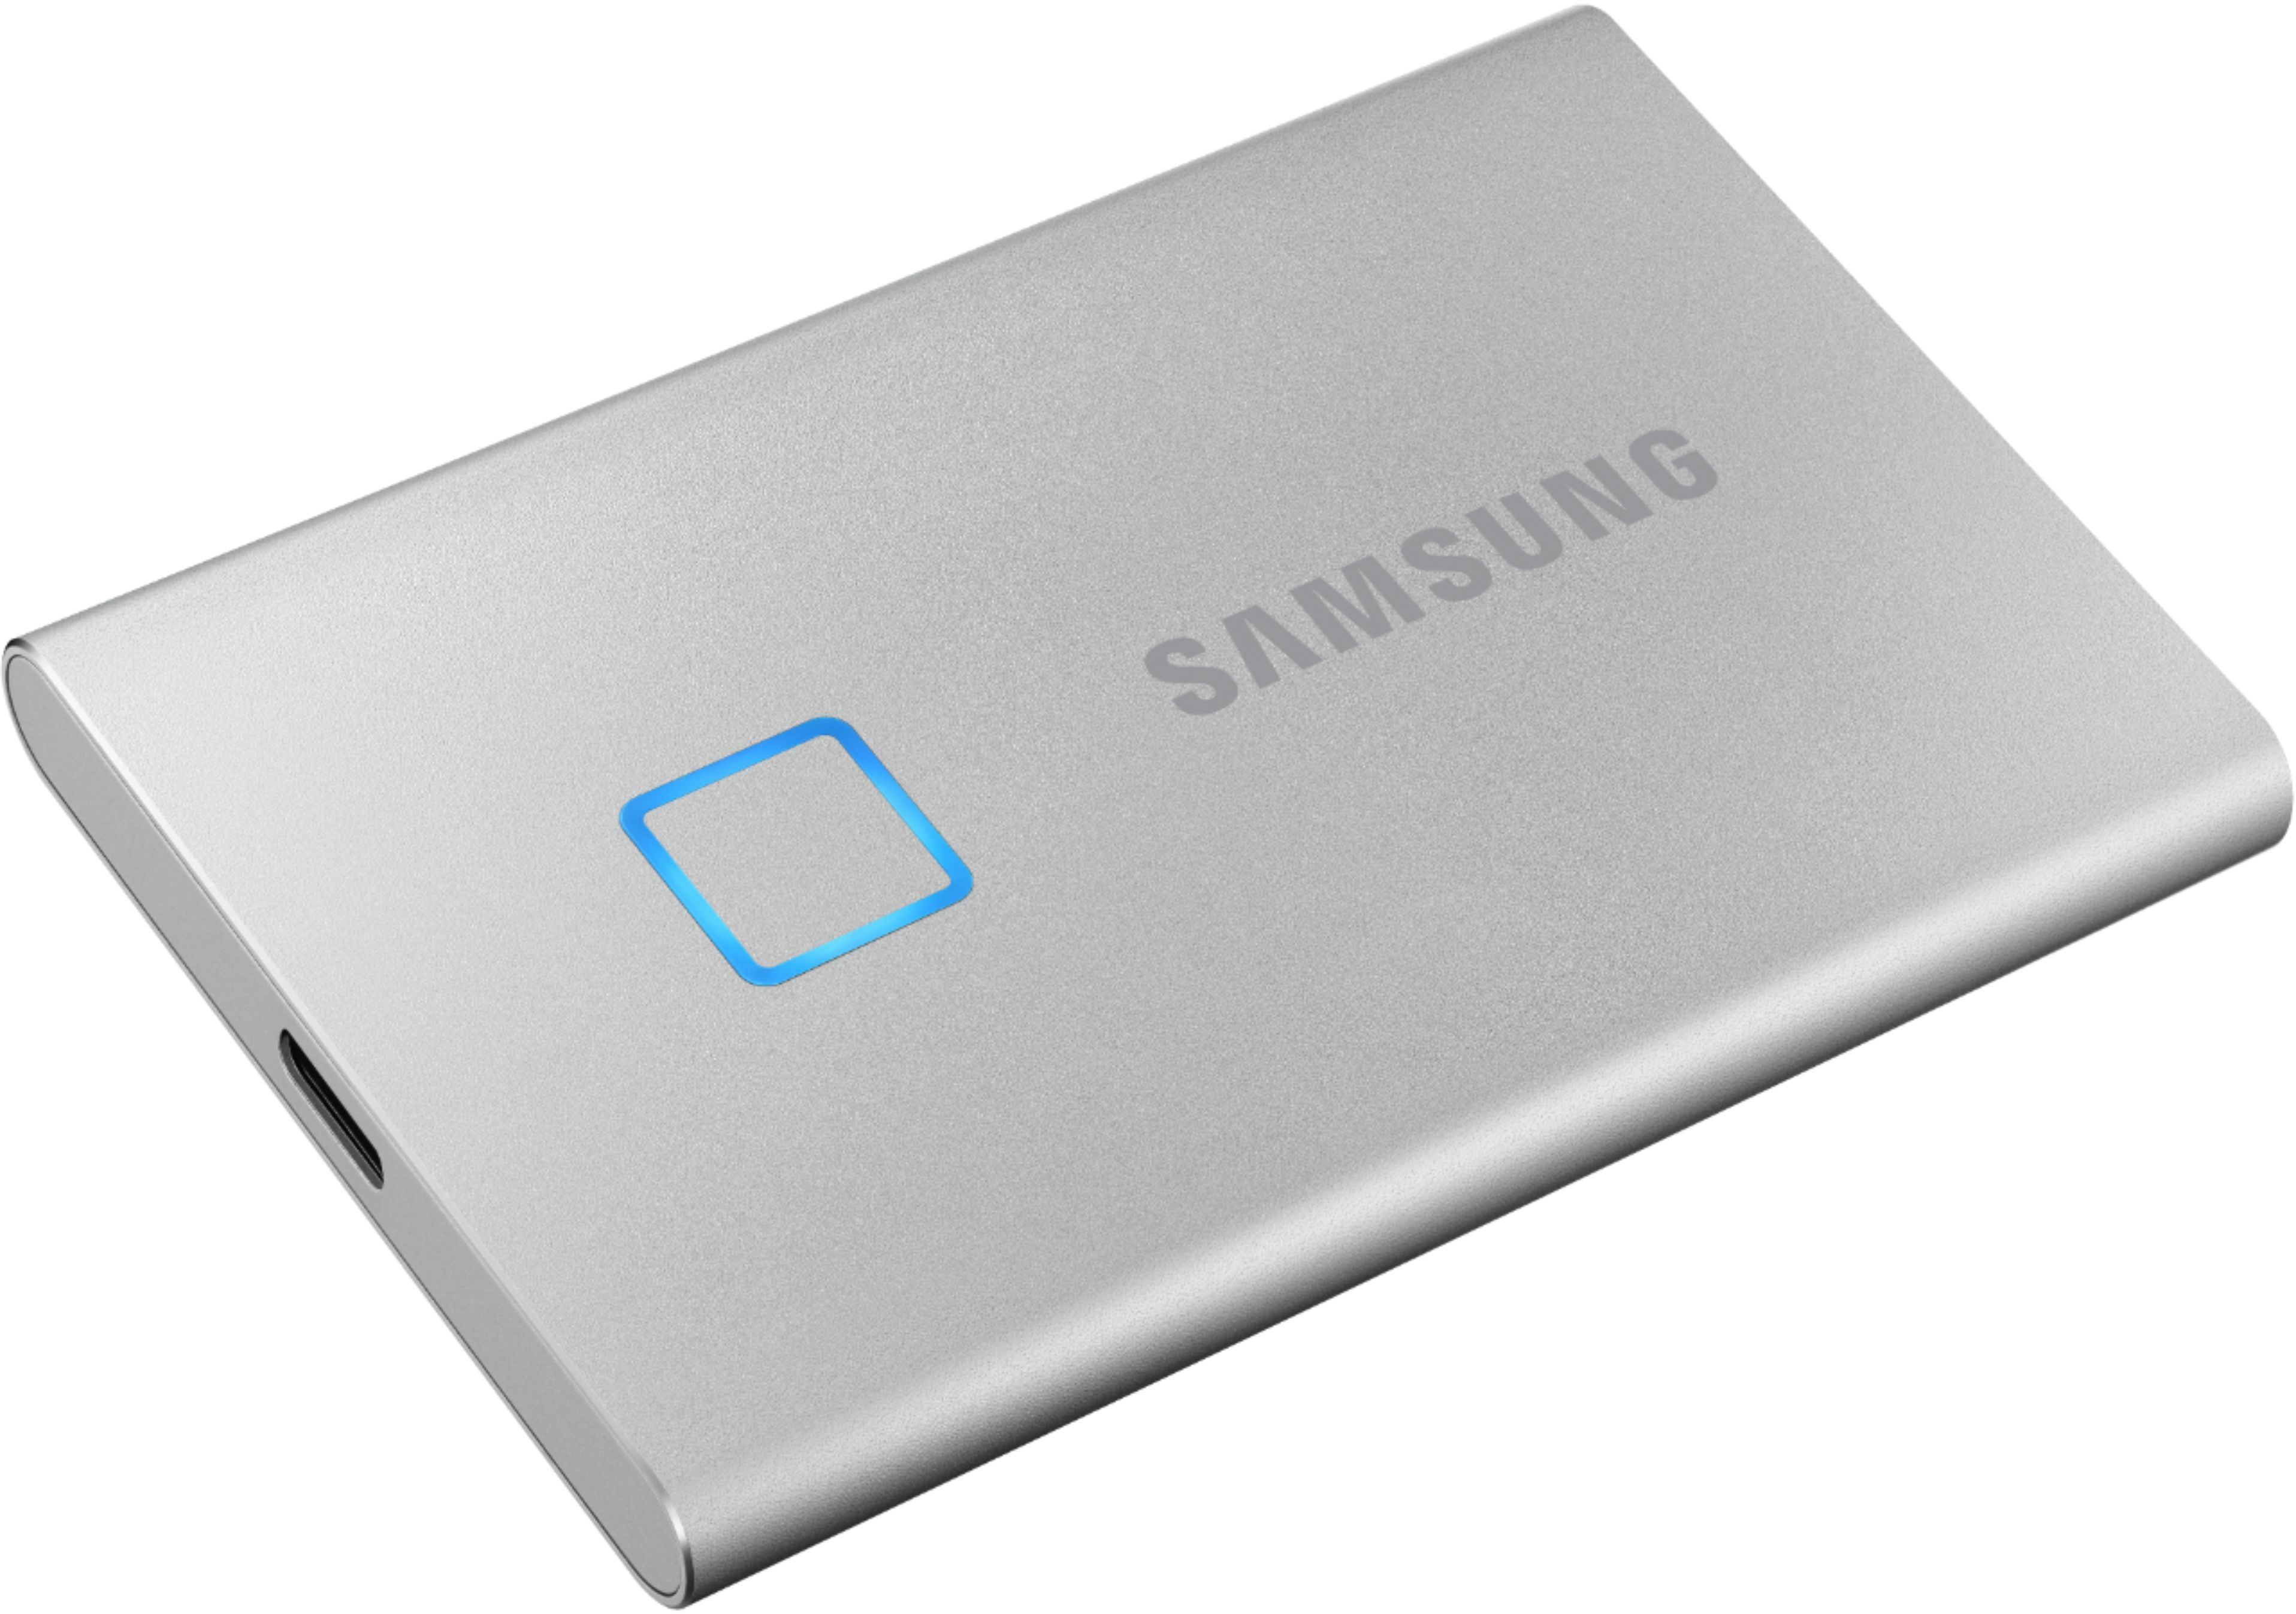 Samsung Releases Portable SSD T7 Touch – the New Standard in Speed and  Security for External Storage Devices – Samsung Newsroom Canada